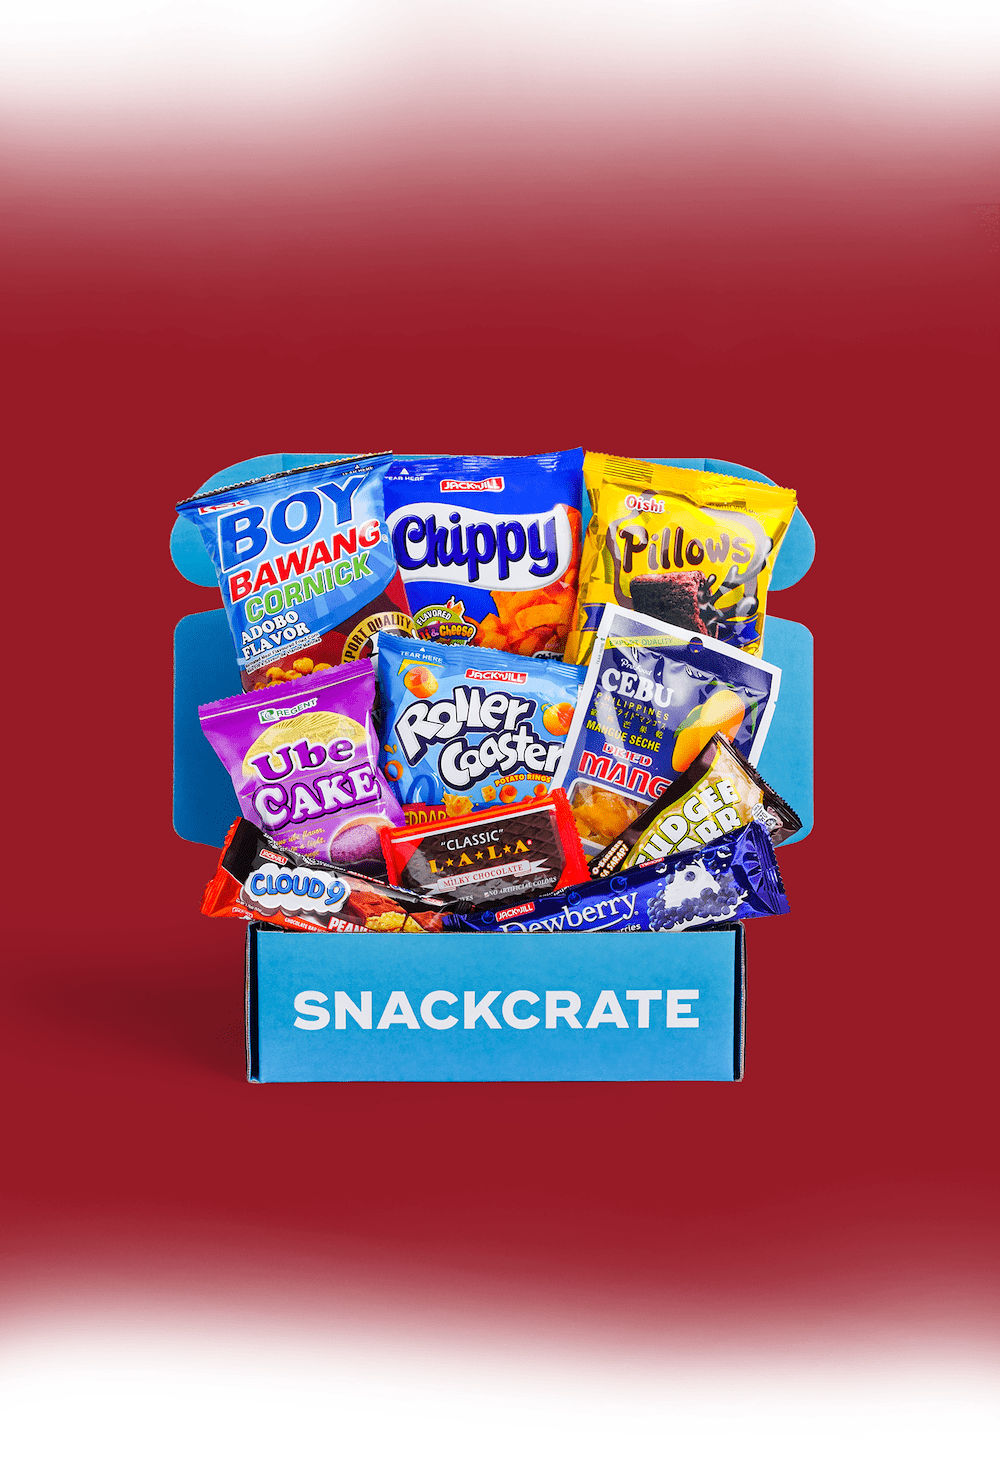 Philippines snackcrate full of foreign snacks